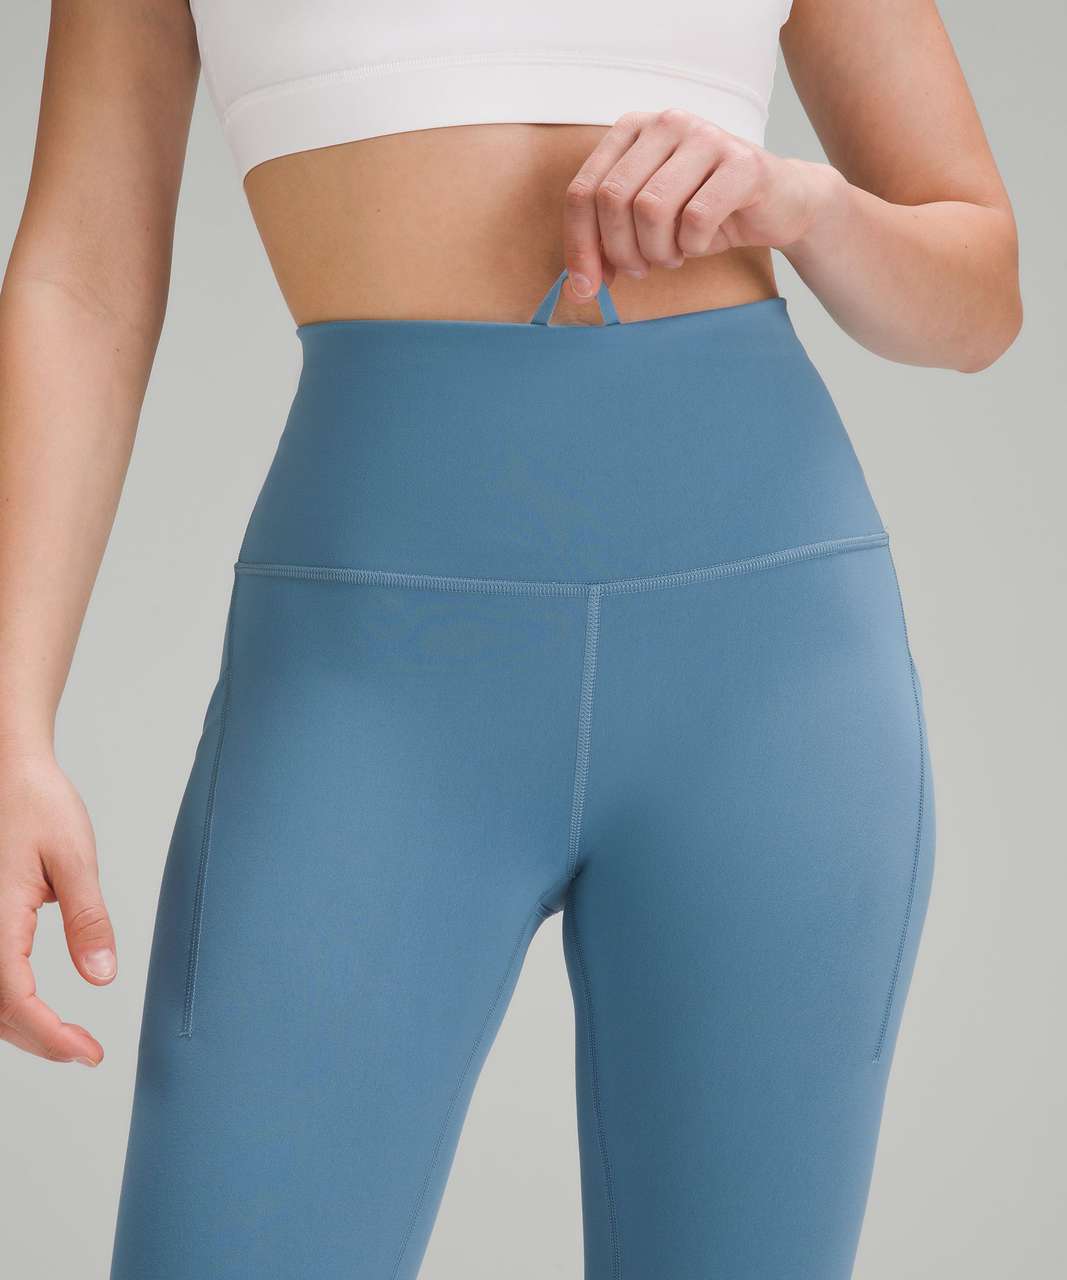 Lululemon Wunder Train High-Rise Tight with Pockets 25" - Utility Blue